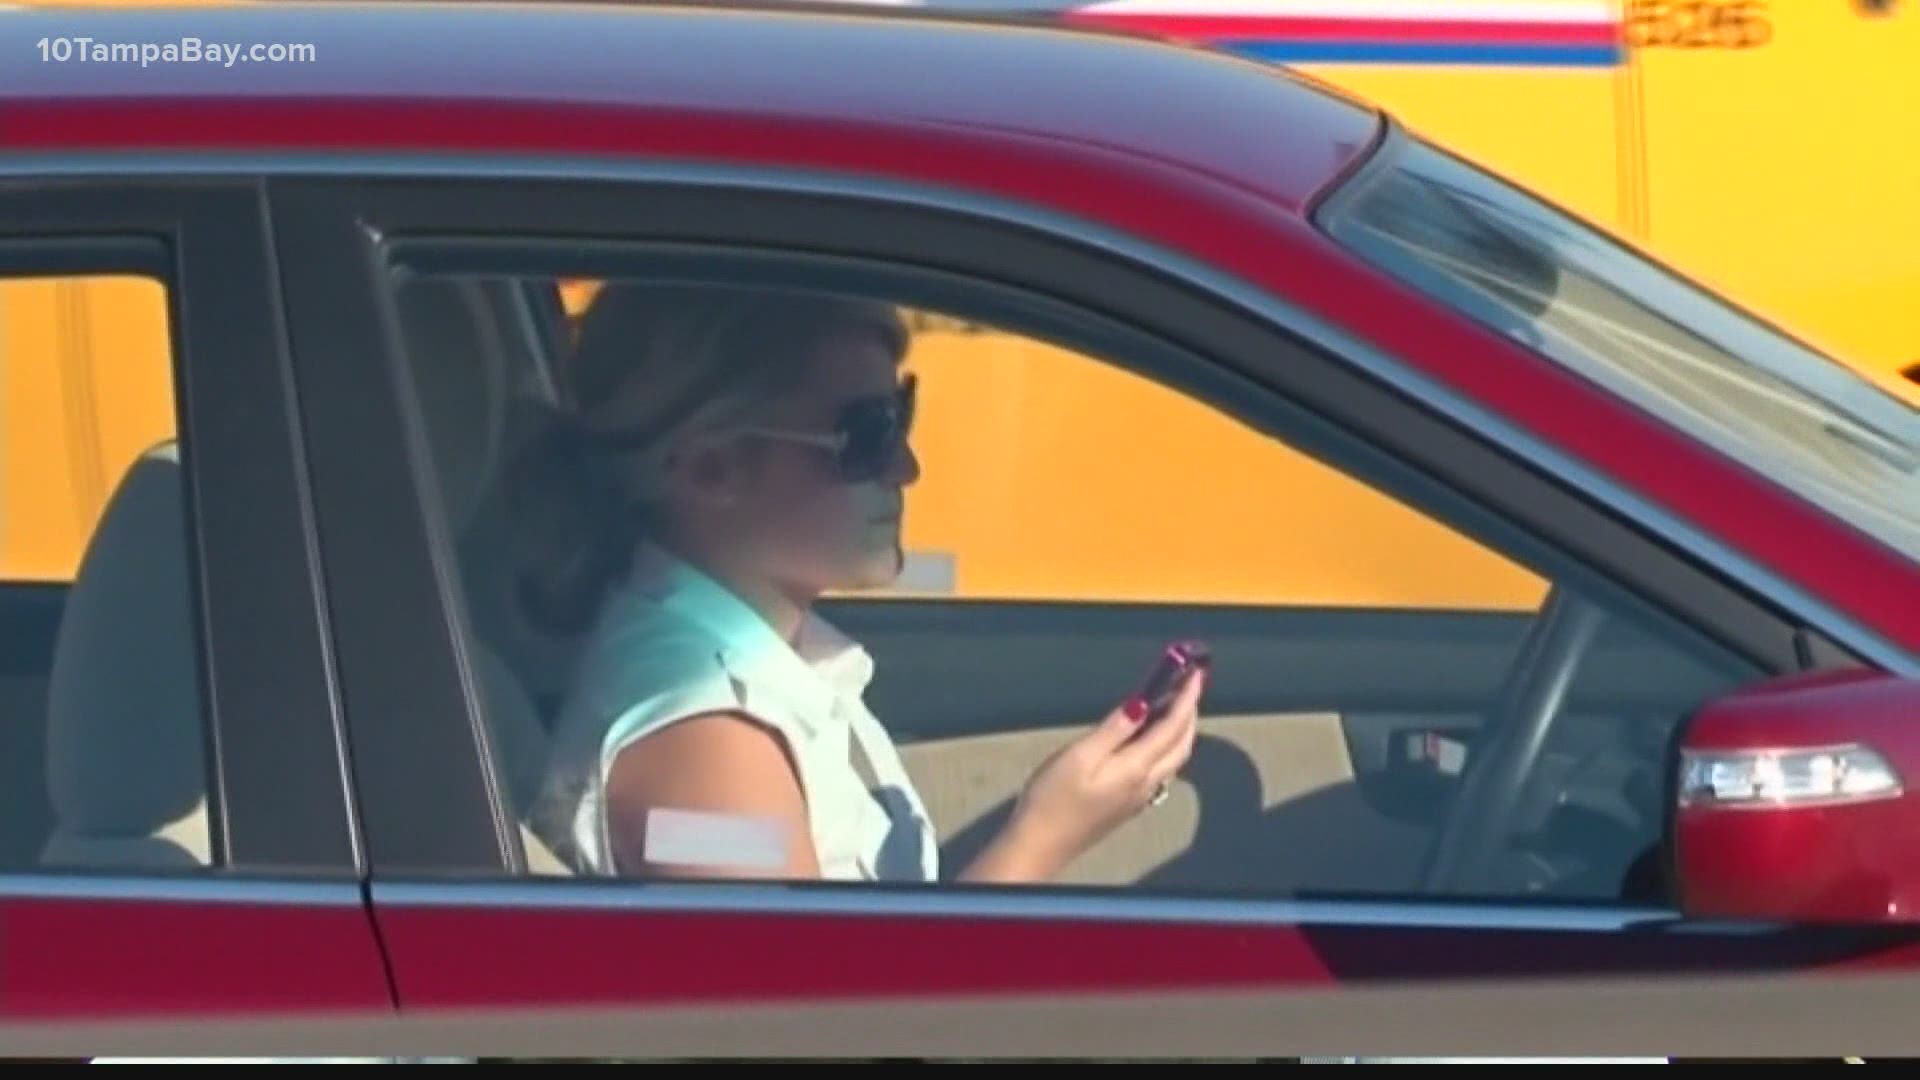 AAA is warning people that distracted driving can be just as dangerous as driving intoxicated.